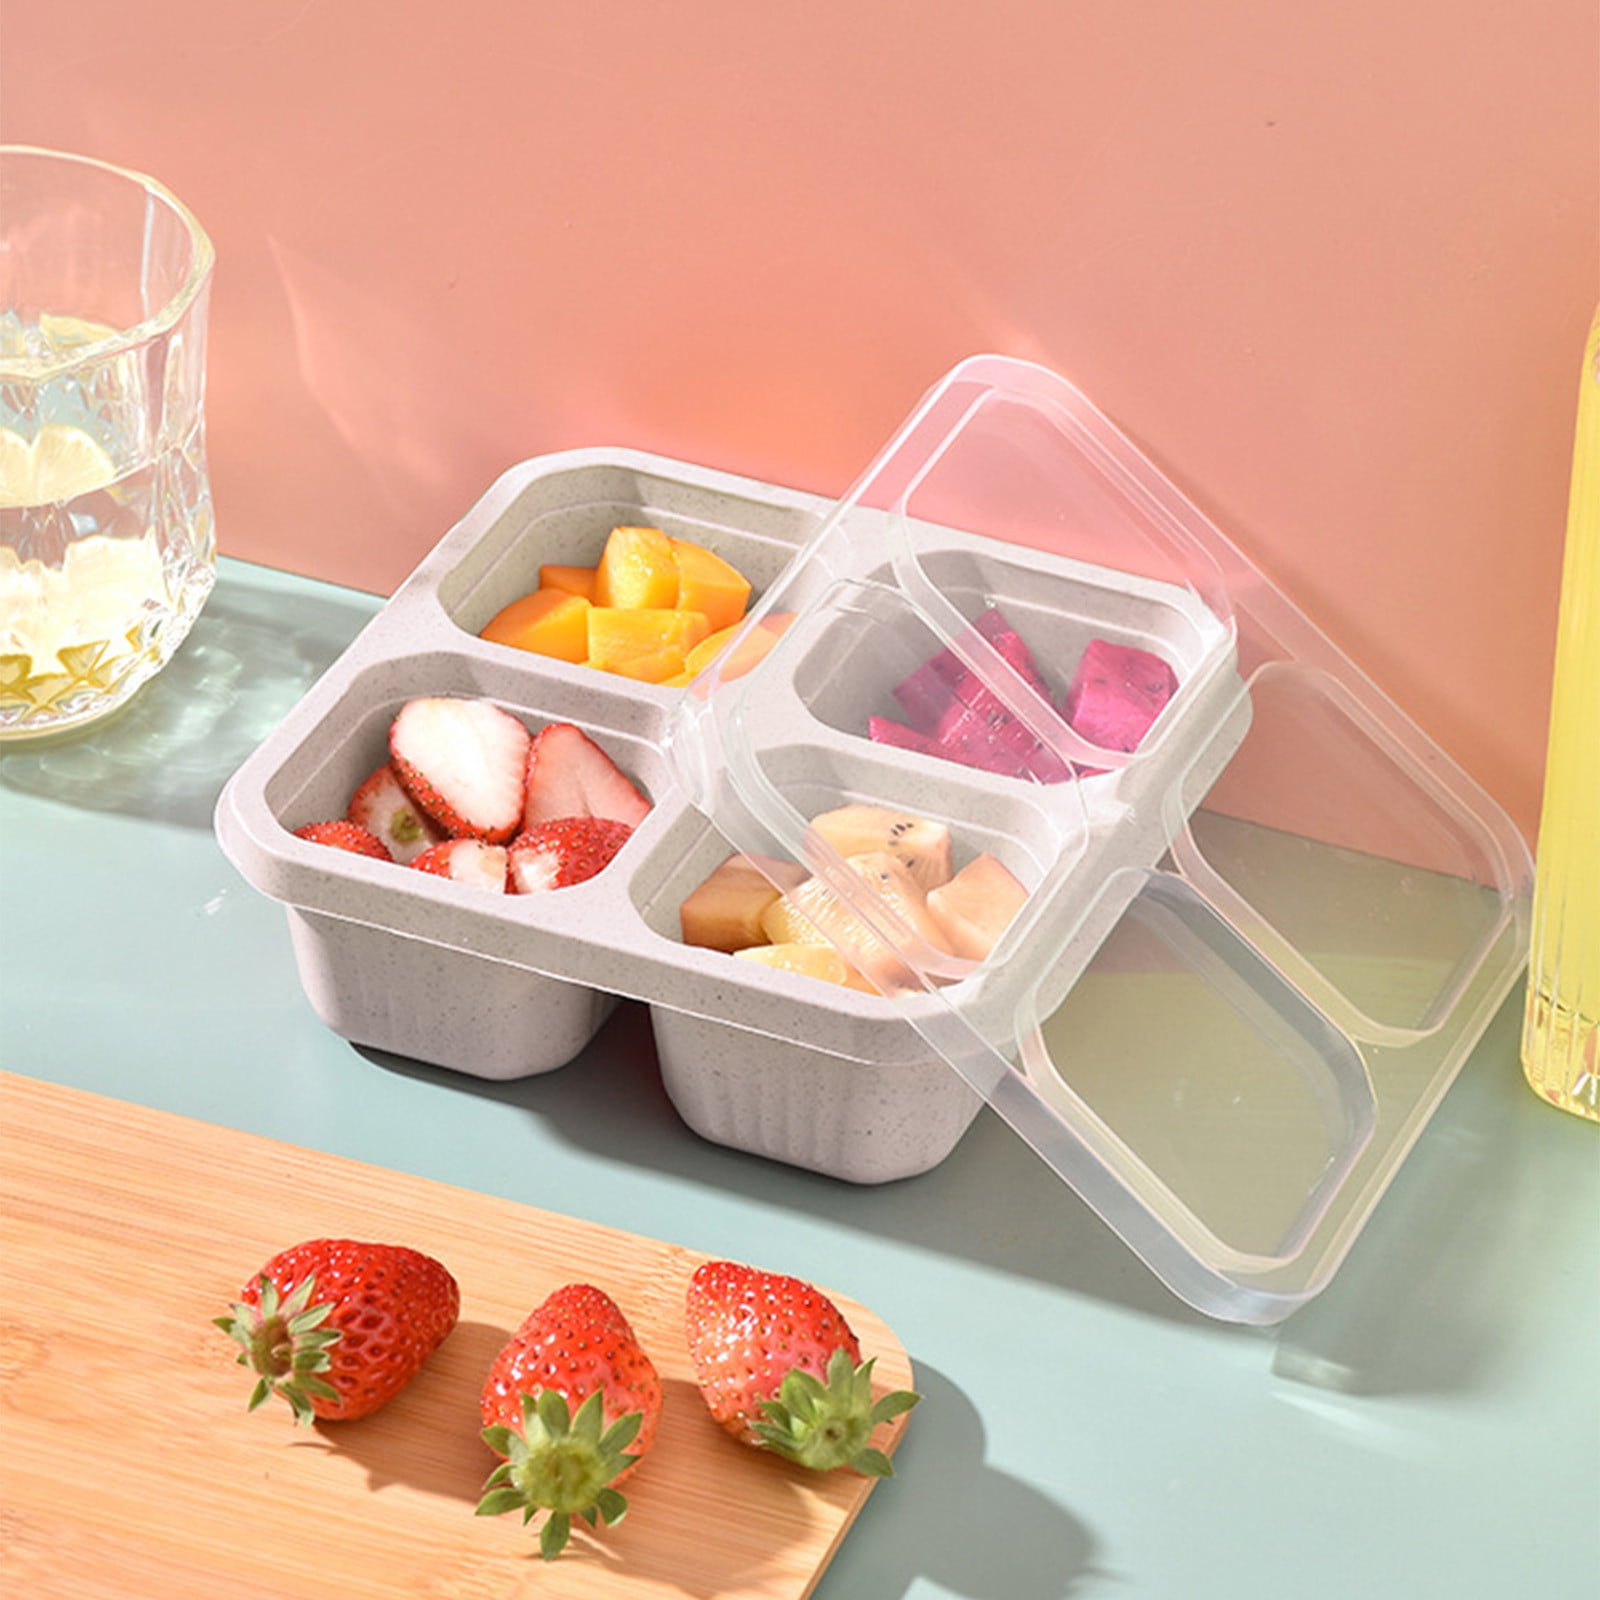 Ozmmyan 4 Compartments Bento Snack Box, Reusable Meal Prep Lunch